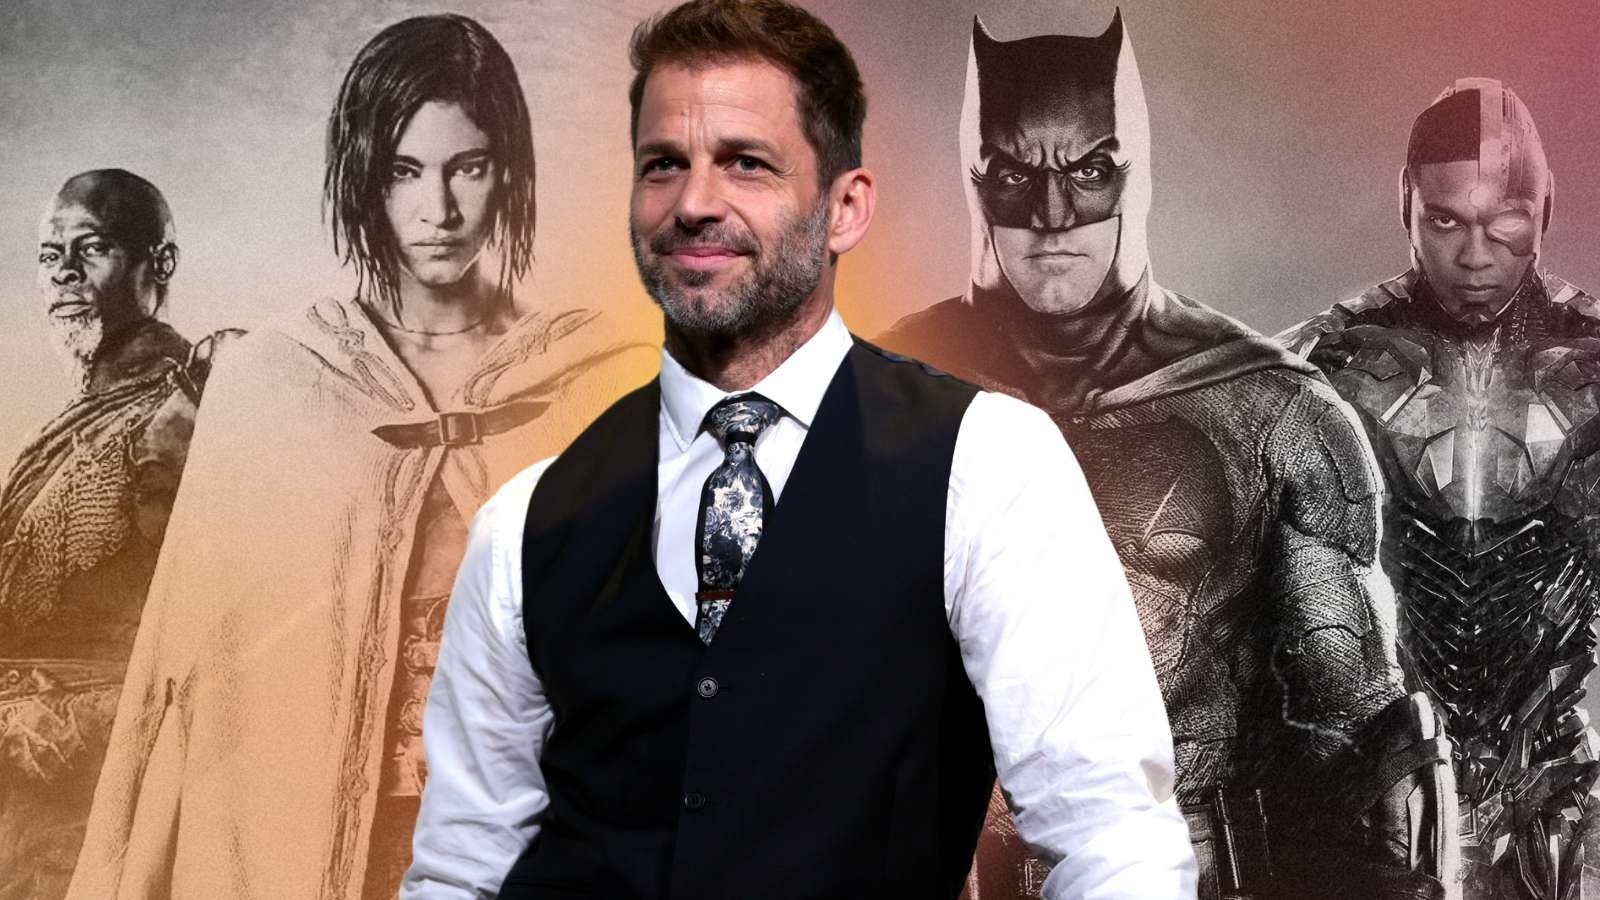 “I’ll give it a chance”: ‘Rebel Moon’ Could Follow in the Footsteps of Justice League 2021 and Redeem Zack Snyder’s Hated Series, Director’s Cut Trailer Proves it